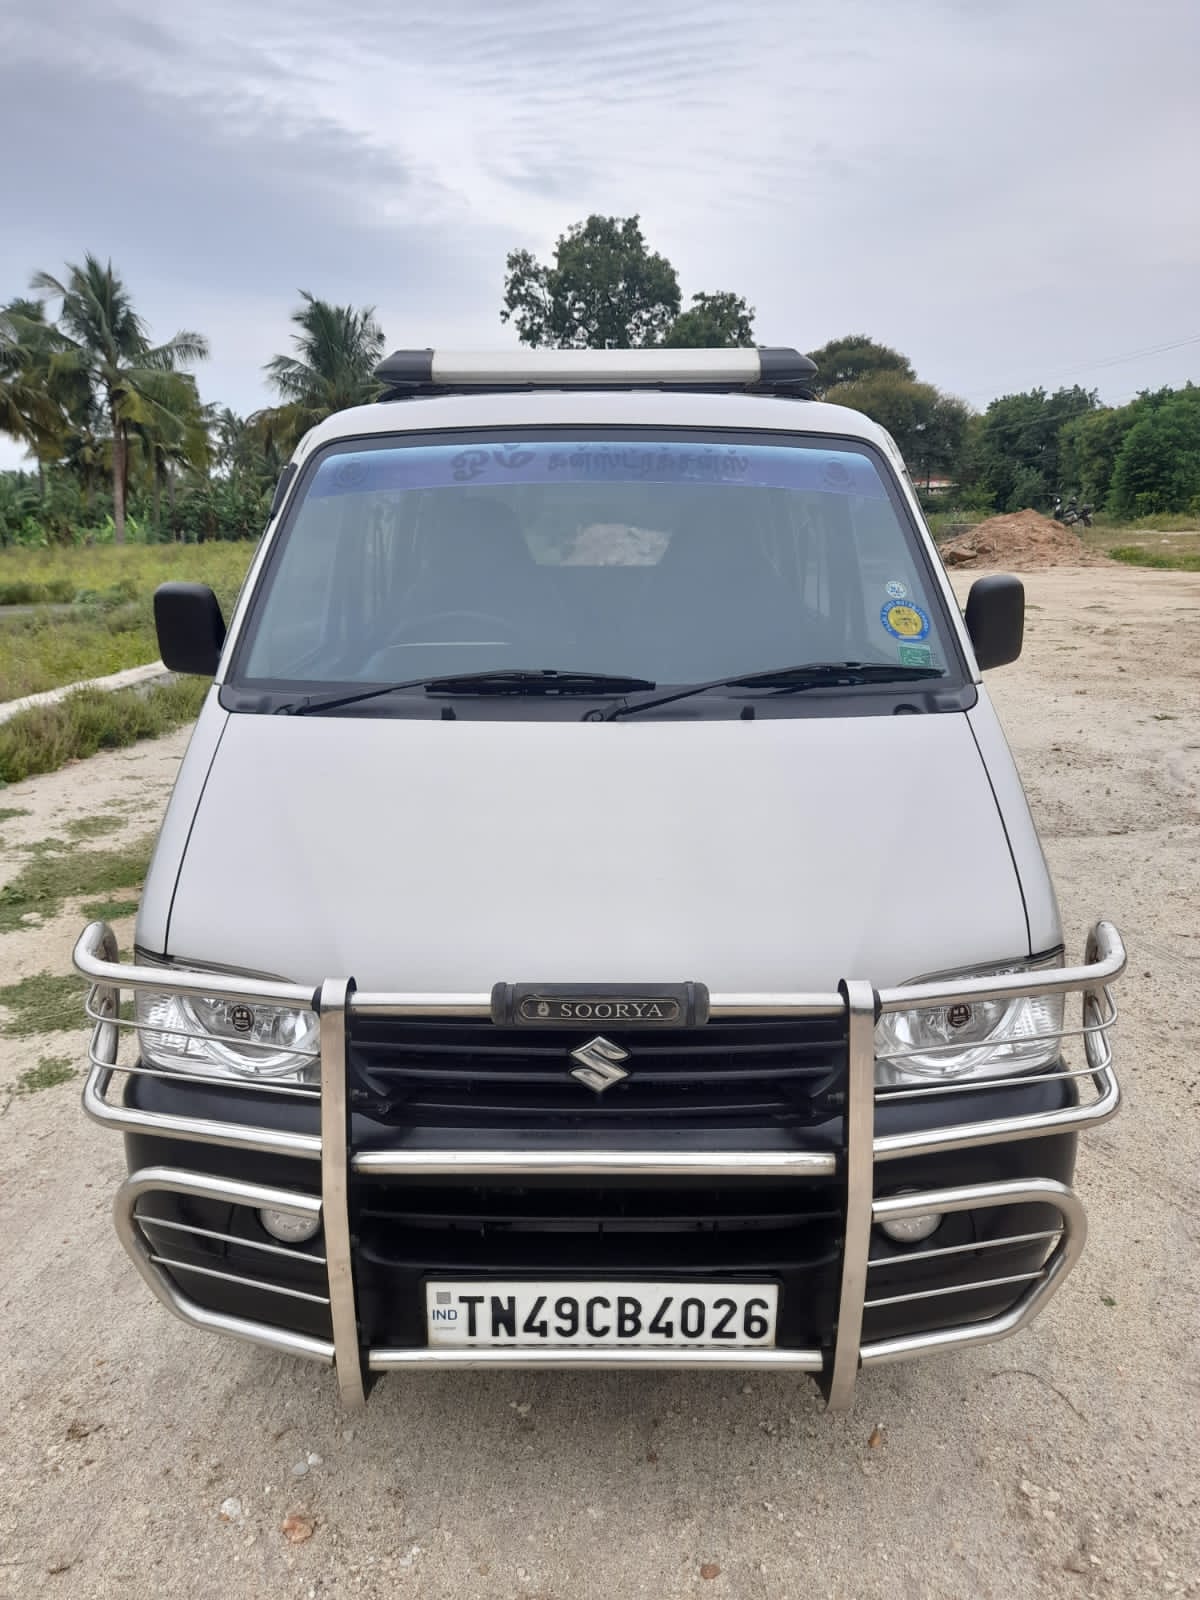 3905-for-sale-Maruthi-Suzuki-Eeco-Petrol-First-Owner-2020-TN-registered-rs-0